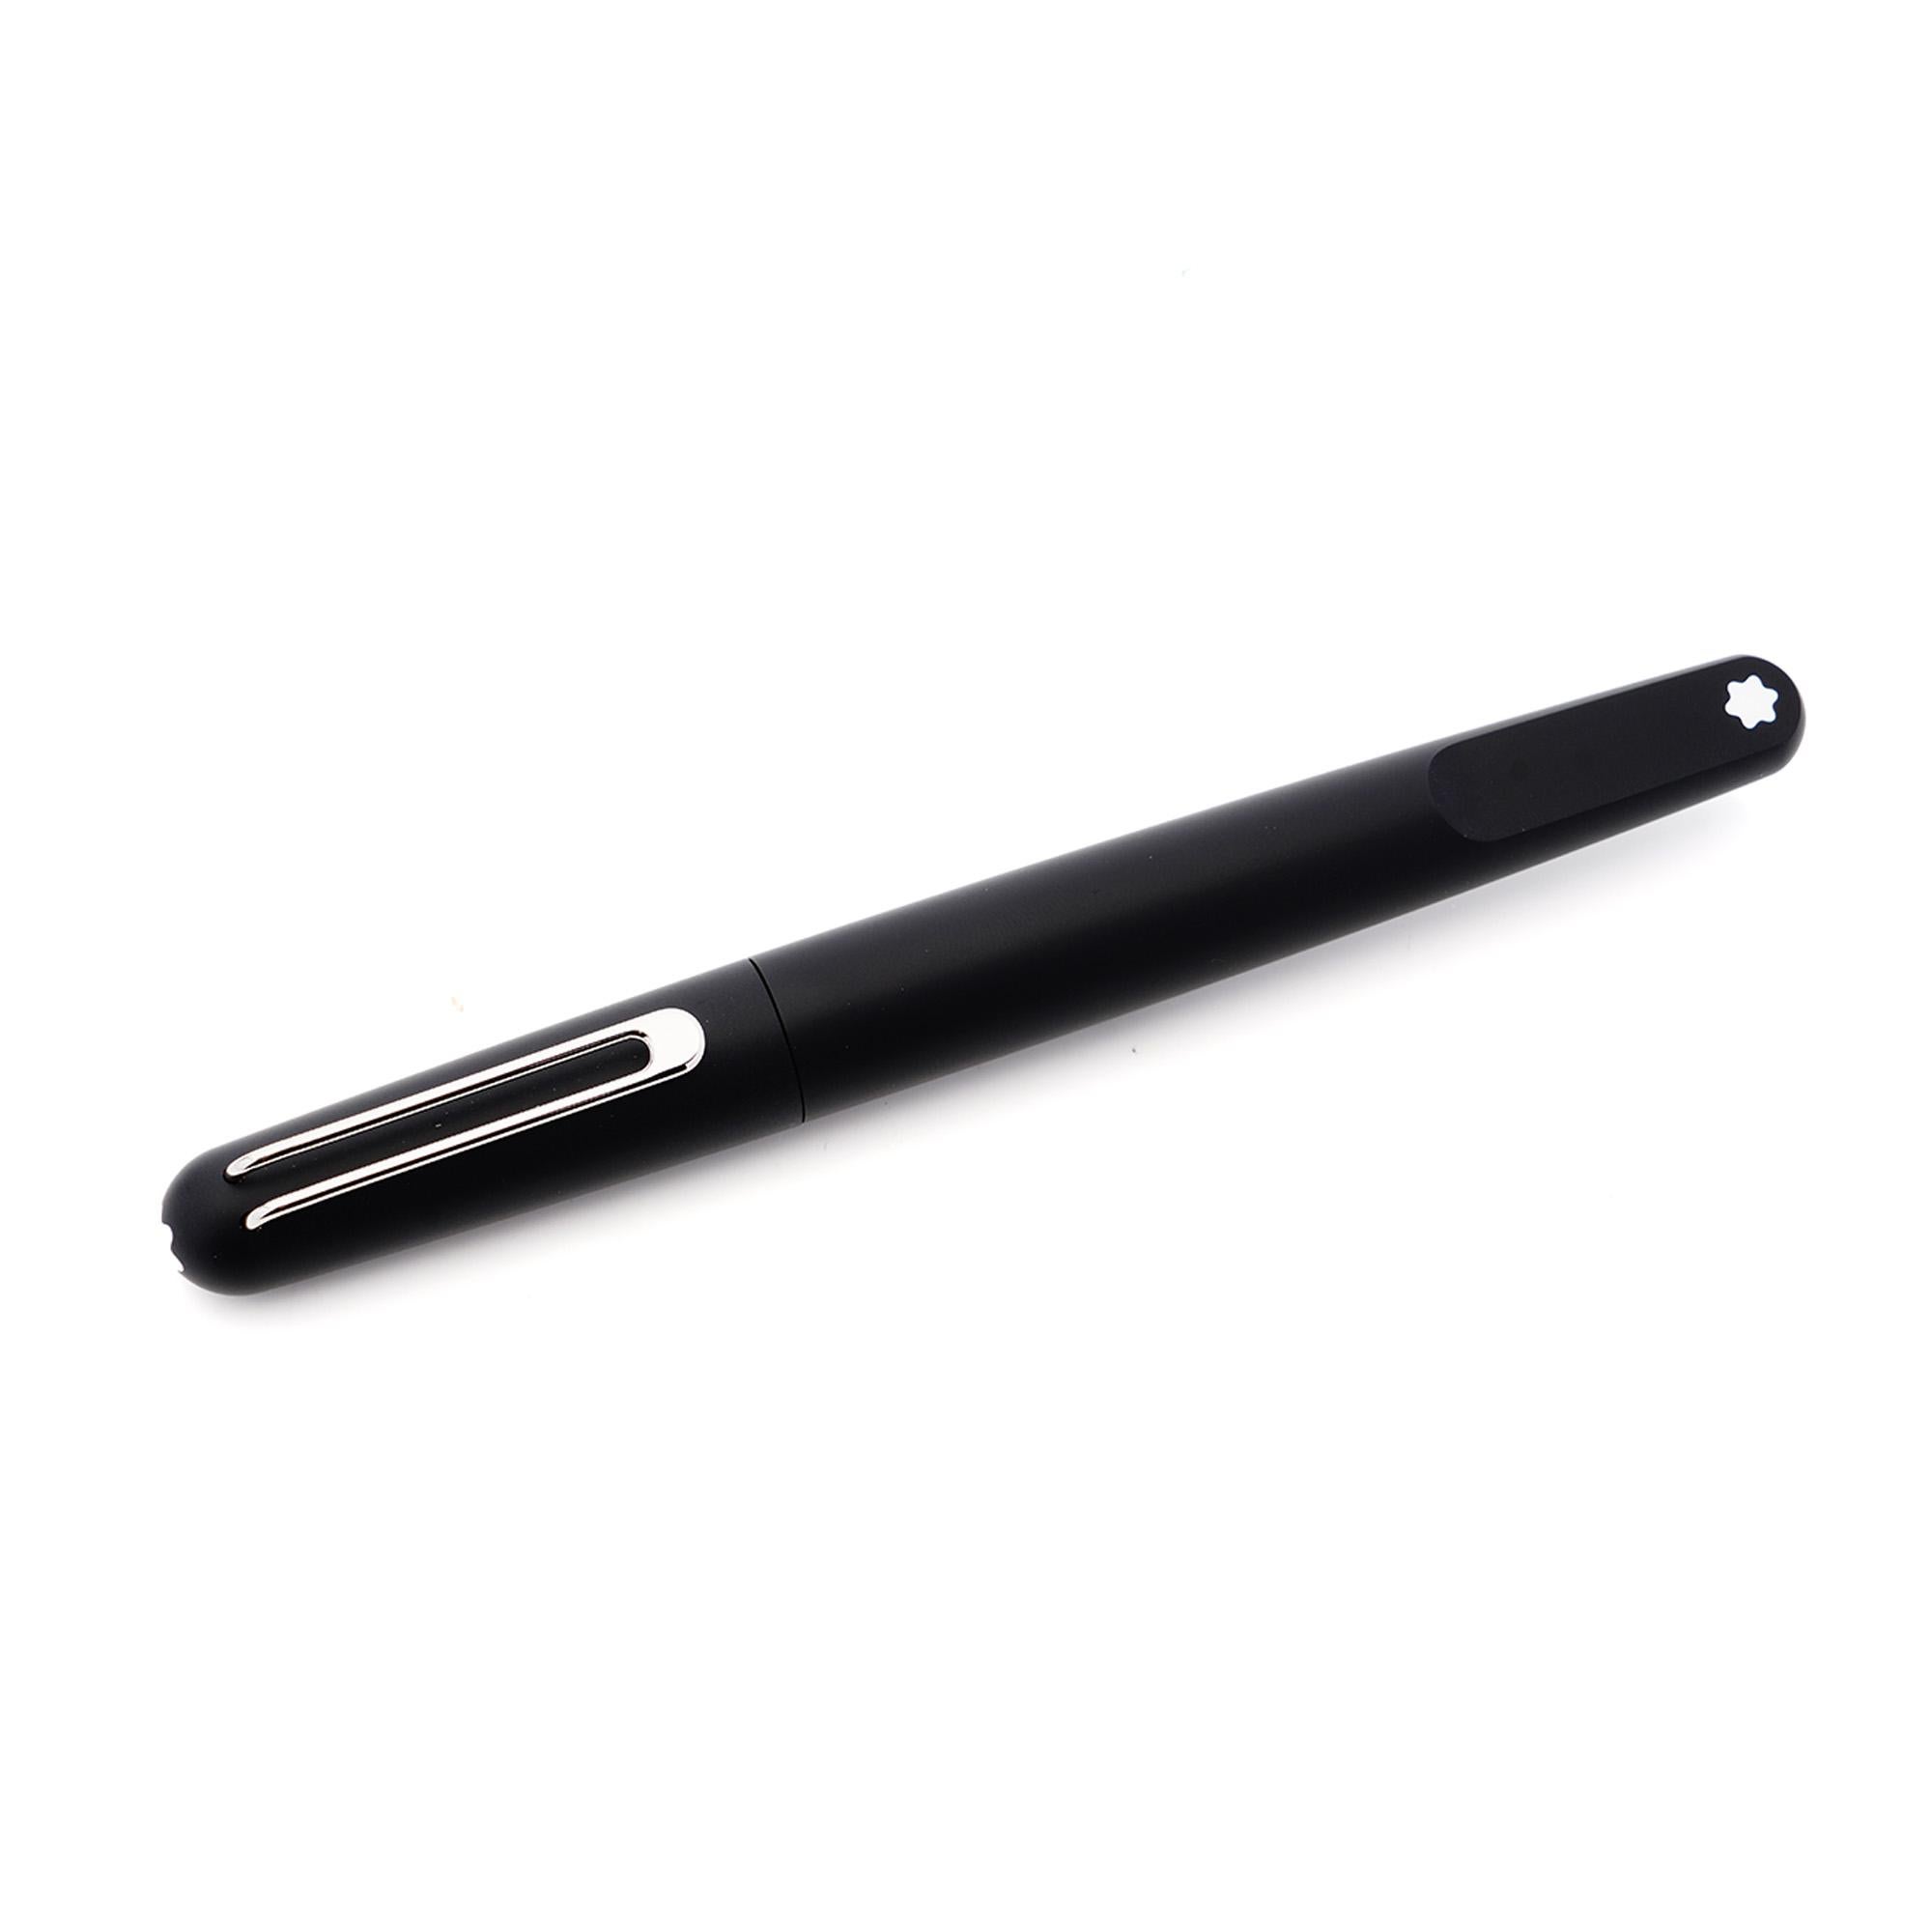 Montblanc M Fountain Pen (Medium Nib) – Black
Model number 116562 

 The model features a magnetic (snap mechanism) cap closure with cap-to-barrel alignment, as well as an additional 'plateau' magnet for the cap to sit on while writing.